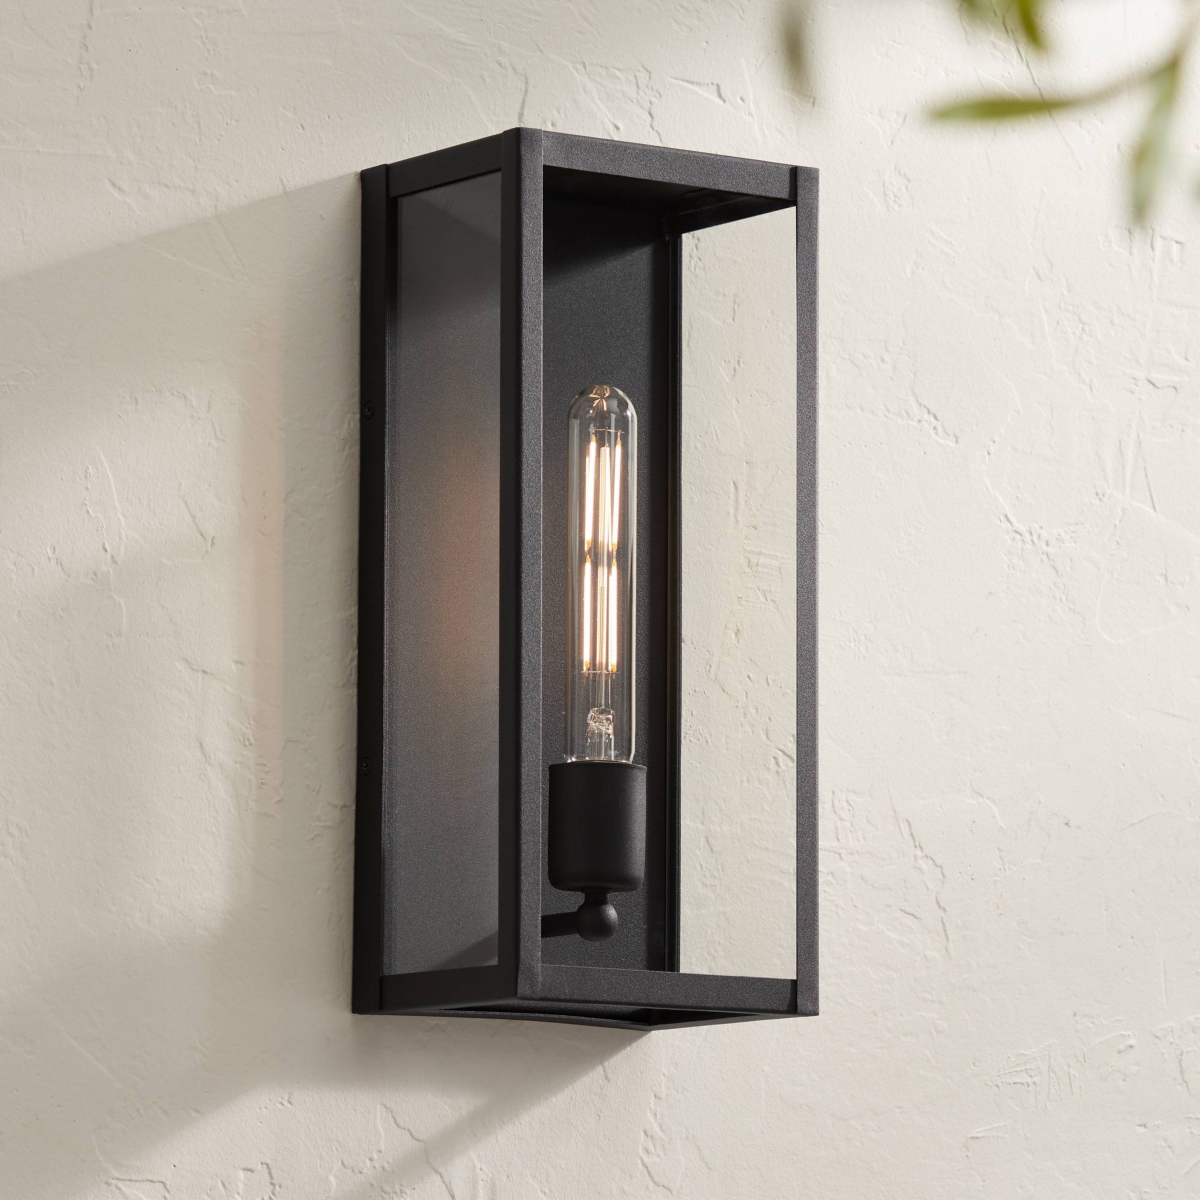 Cornell Modern Industrial Box-Shaped Outdoor Wall Light Fixture Sand Black Metal 14 1/4" Clear Glass for Exterior House Porch Patio Outside Deck Garag